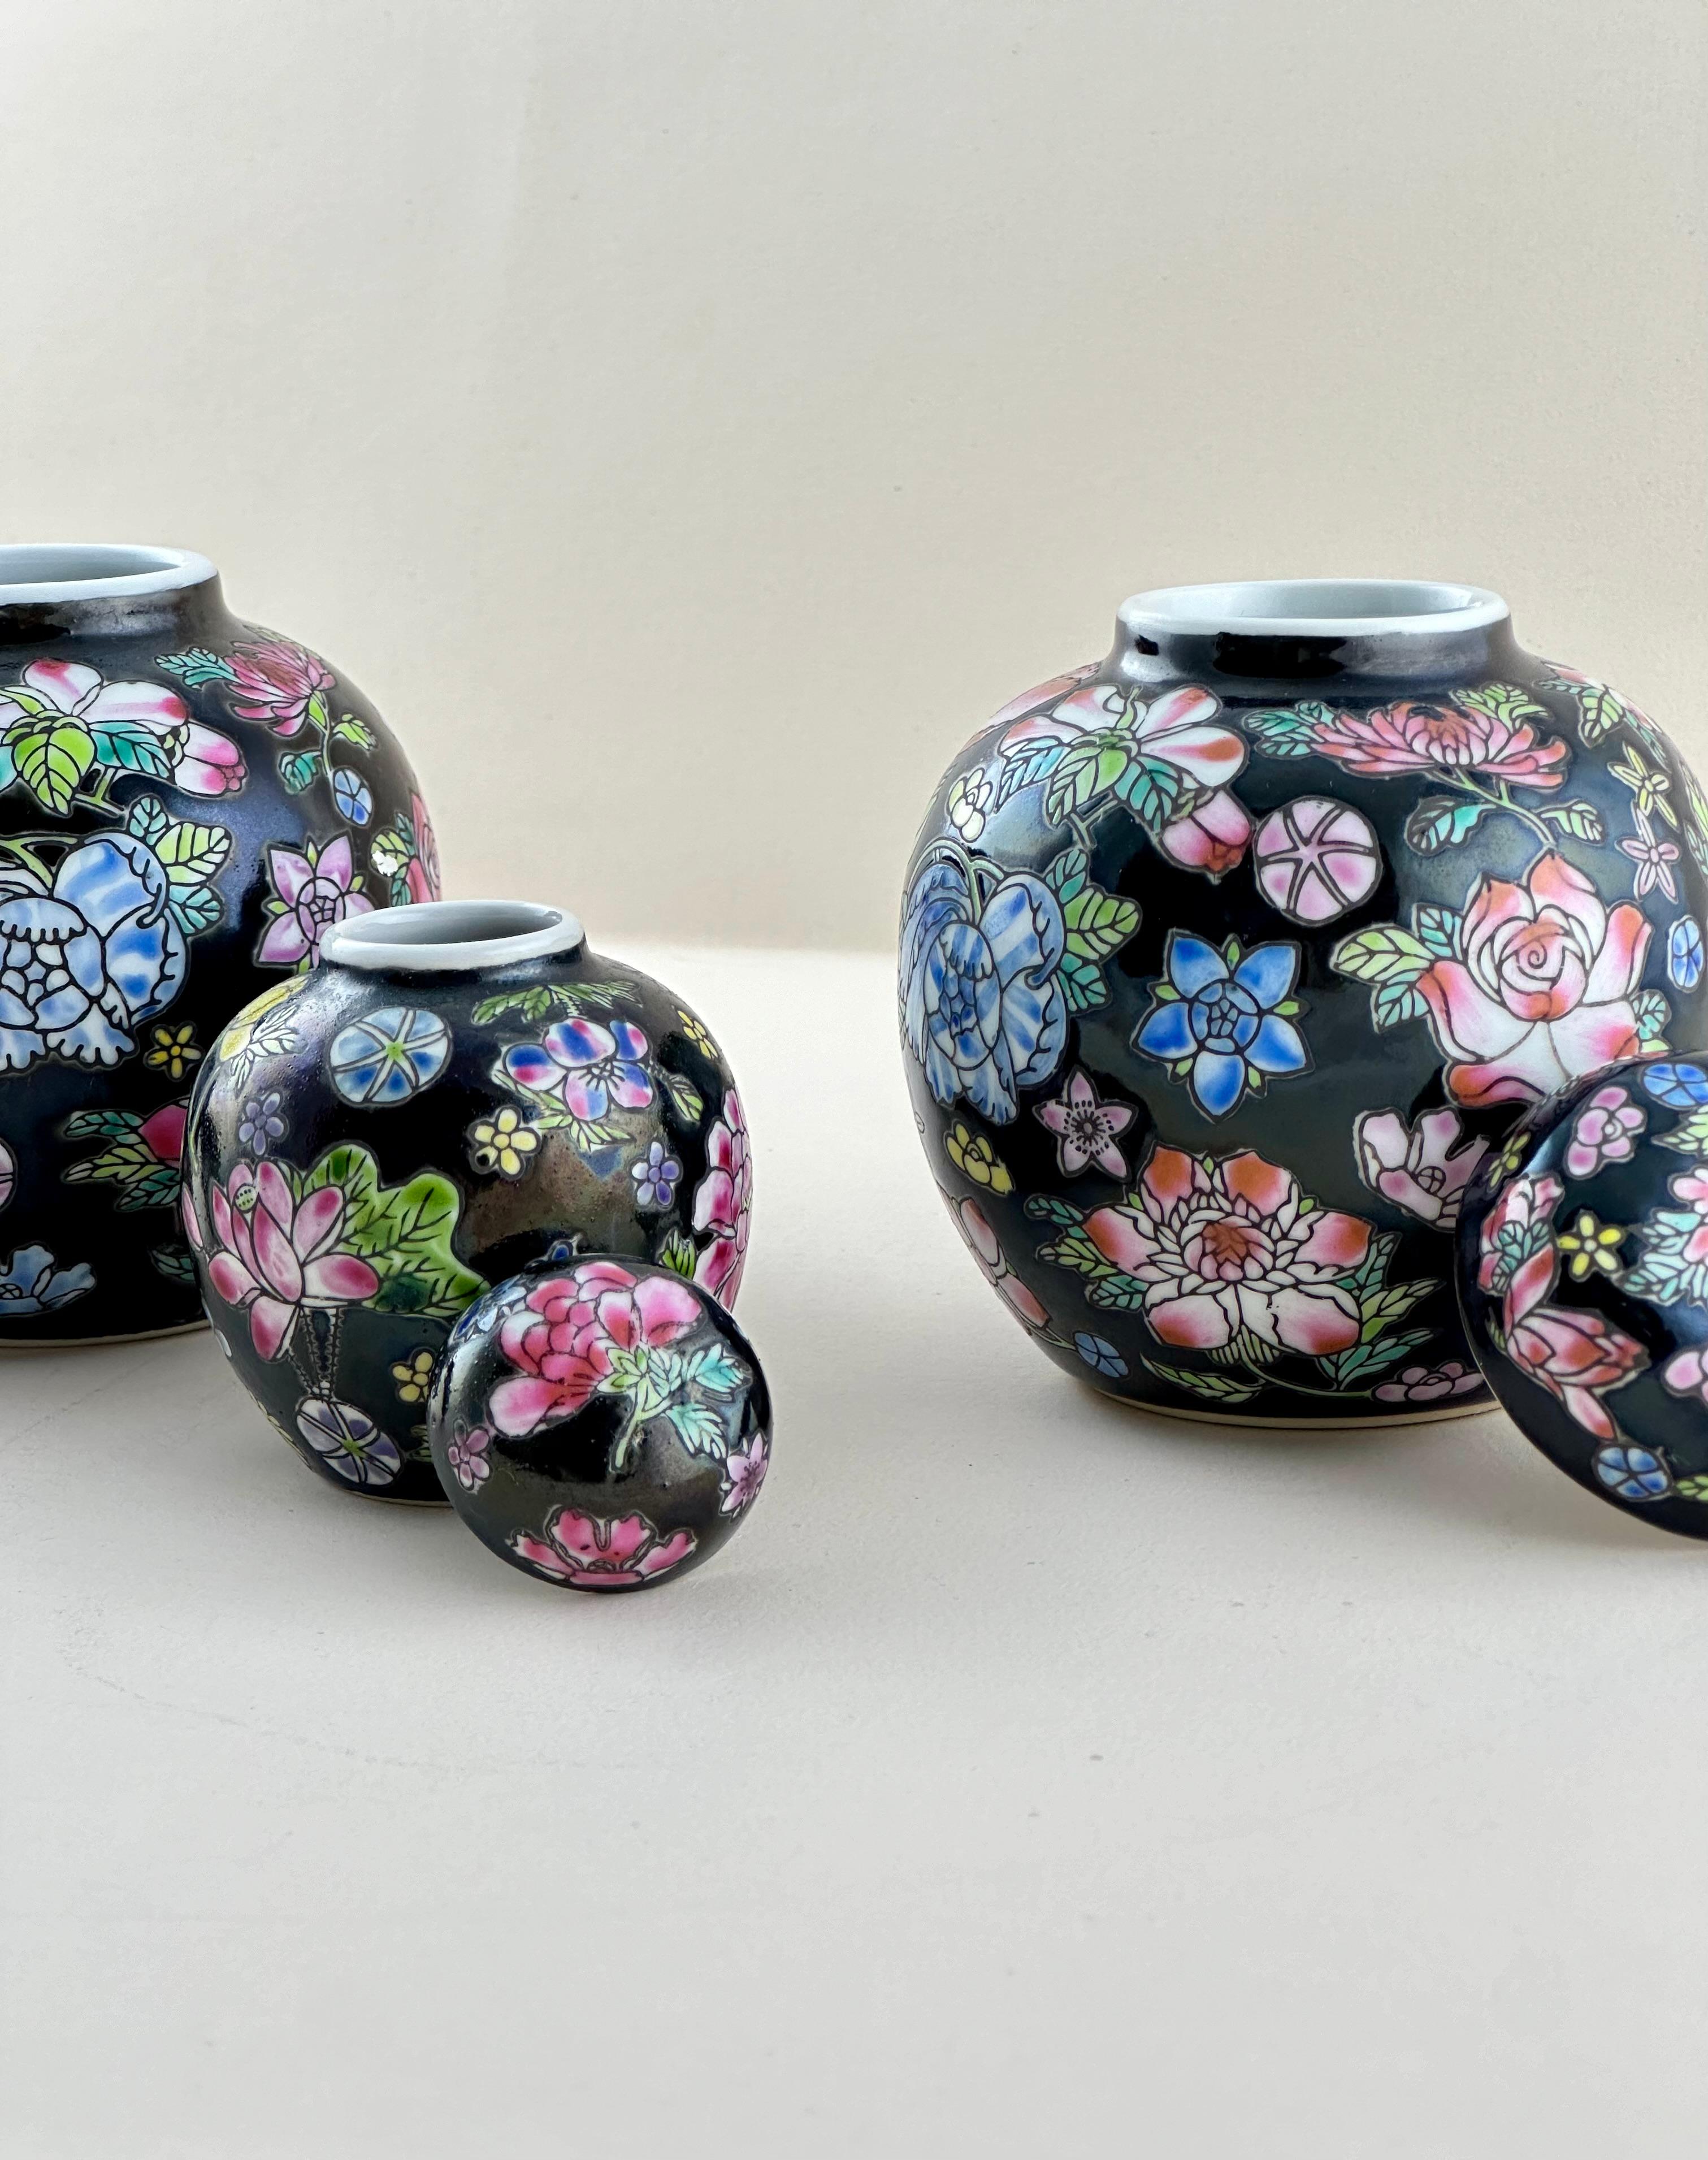 A set of three small vintage ginger jars crafted in the Jingdezhen region of China in the 1970s.

This miniature trio is decorated in the ‘Famille Noire’ style, a style originating from the Kangxi era of the Qing Dynasty. The Chinese porcelain jars